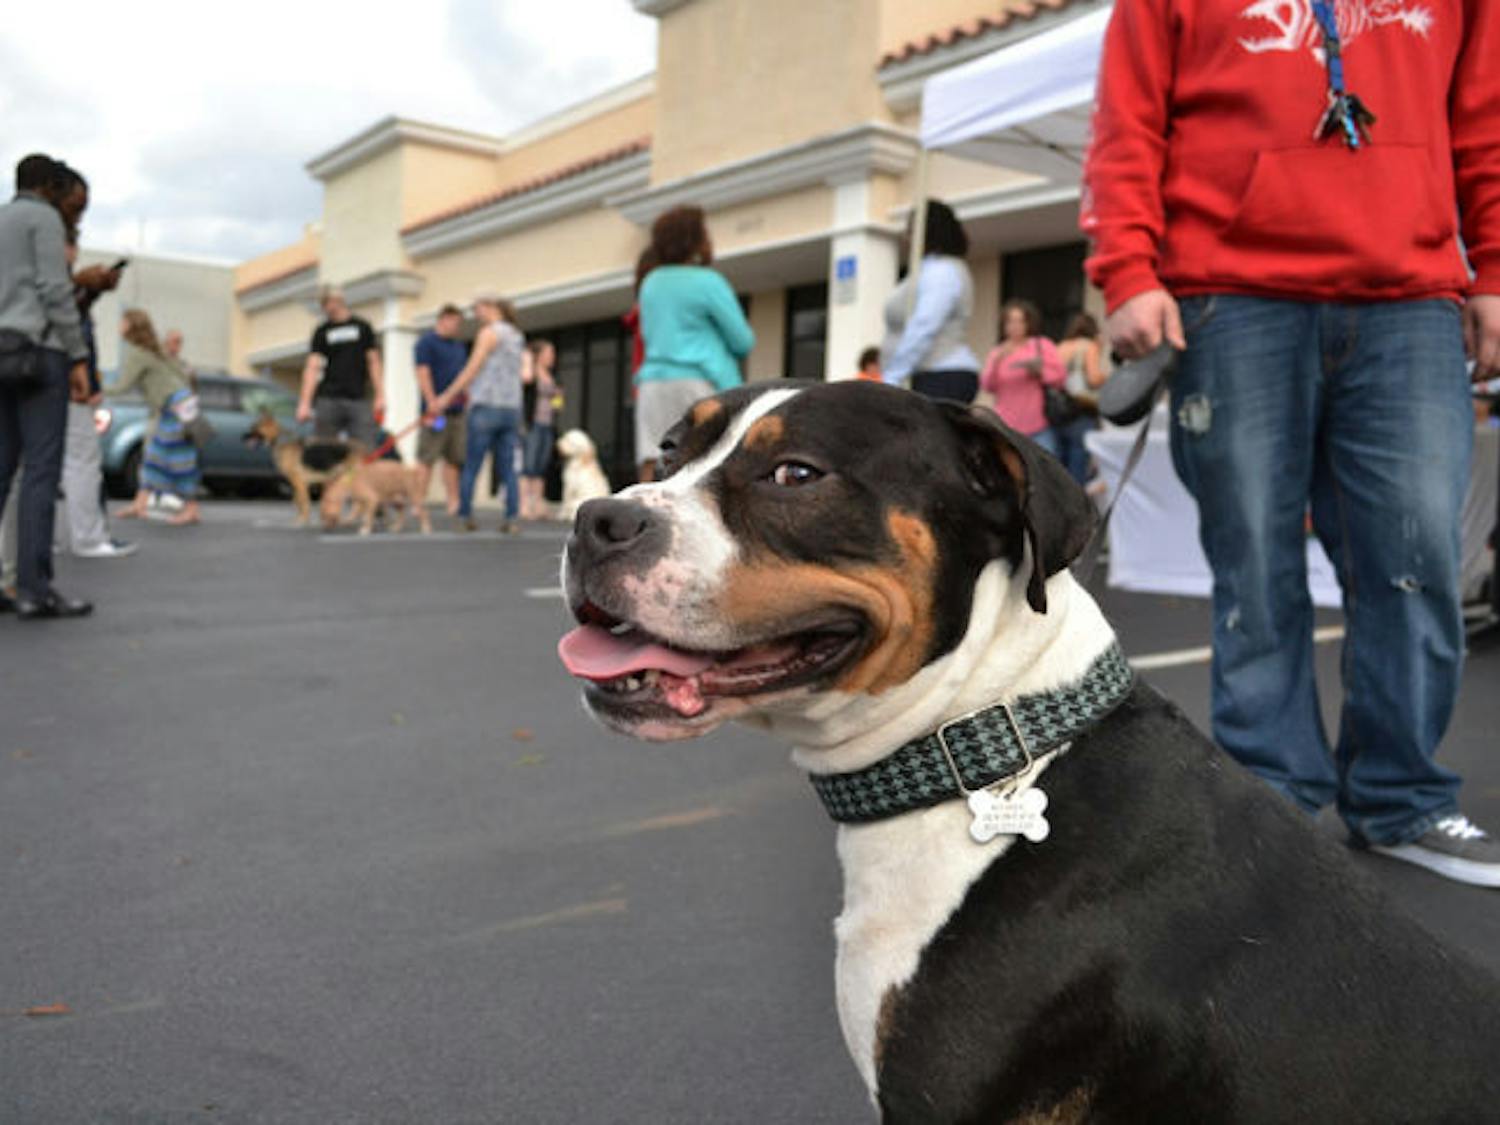 Gainesville dog rescue organization Plenty of Pit Bulls hosted an adoption event to celebrate the opening of the Robertson's Animal Hospital on Saturday. Boomer is one of a few dogs who attended the event.&nbsp;
This caption has been changed to reflect an editing error: Boomer was not adopted at the event; he was there to socialize with other pets.&nbsp;